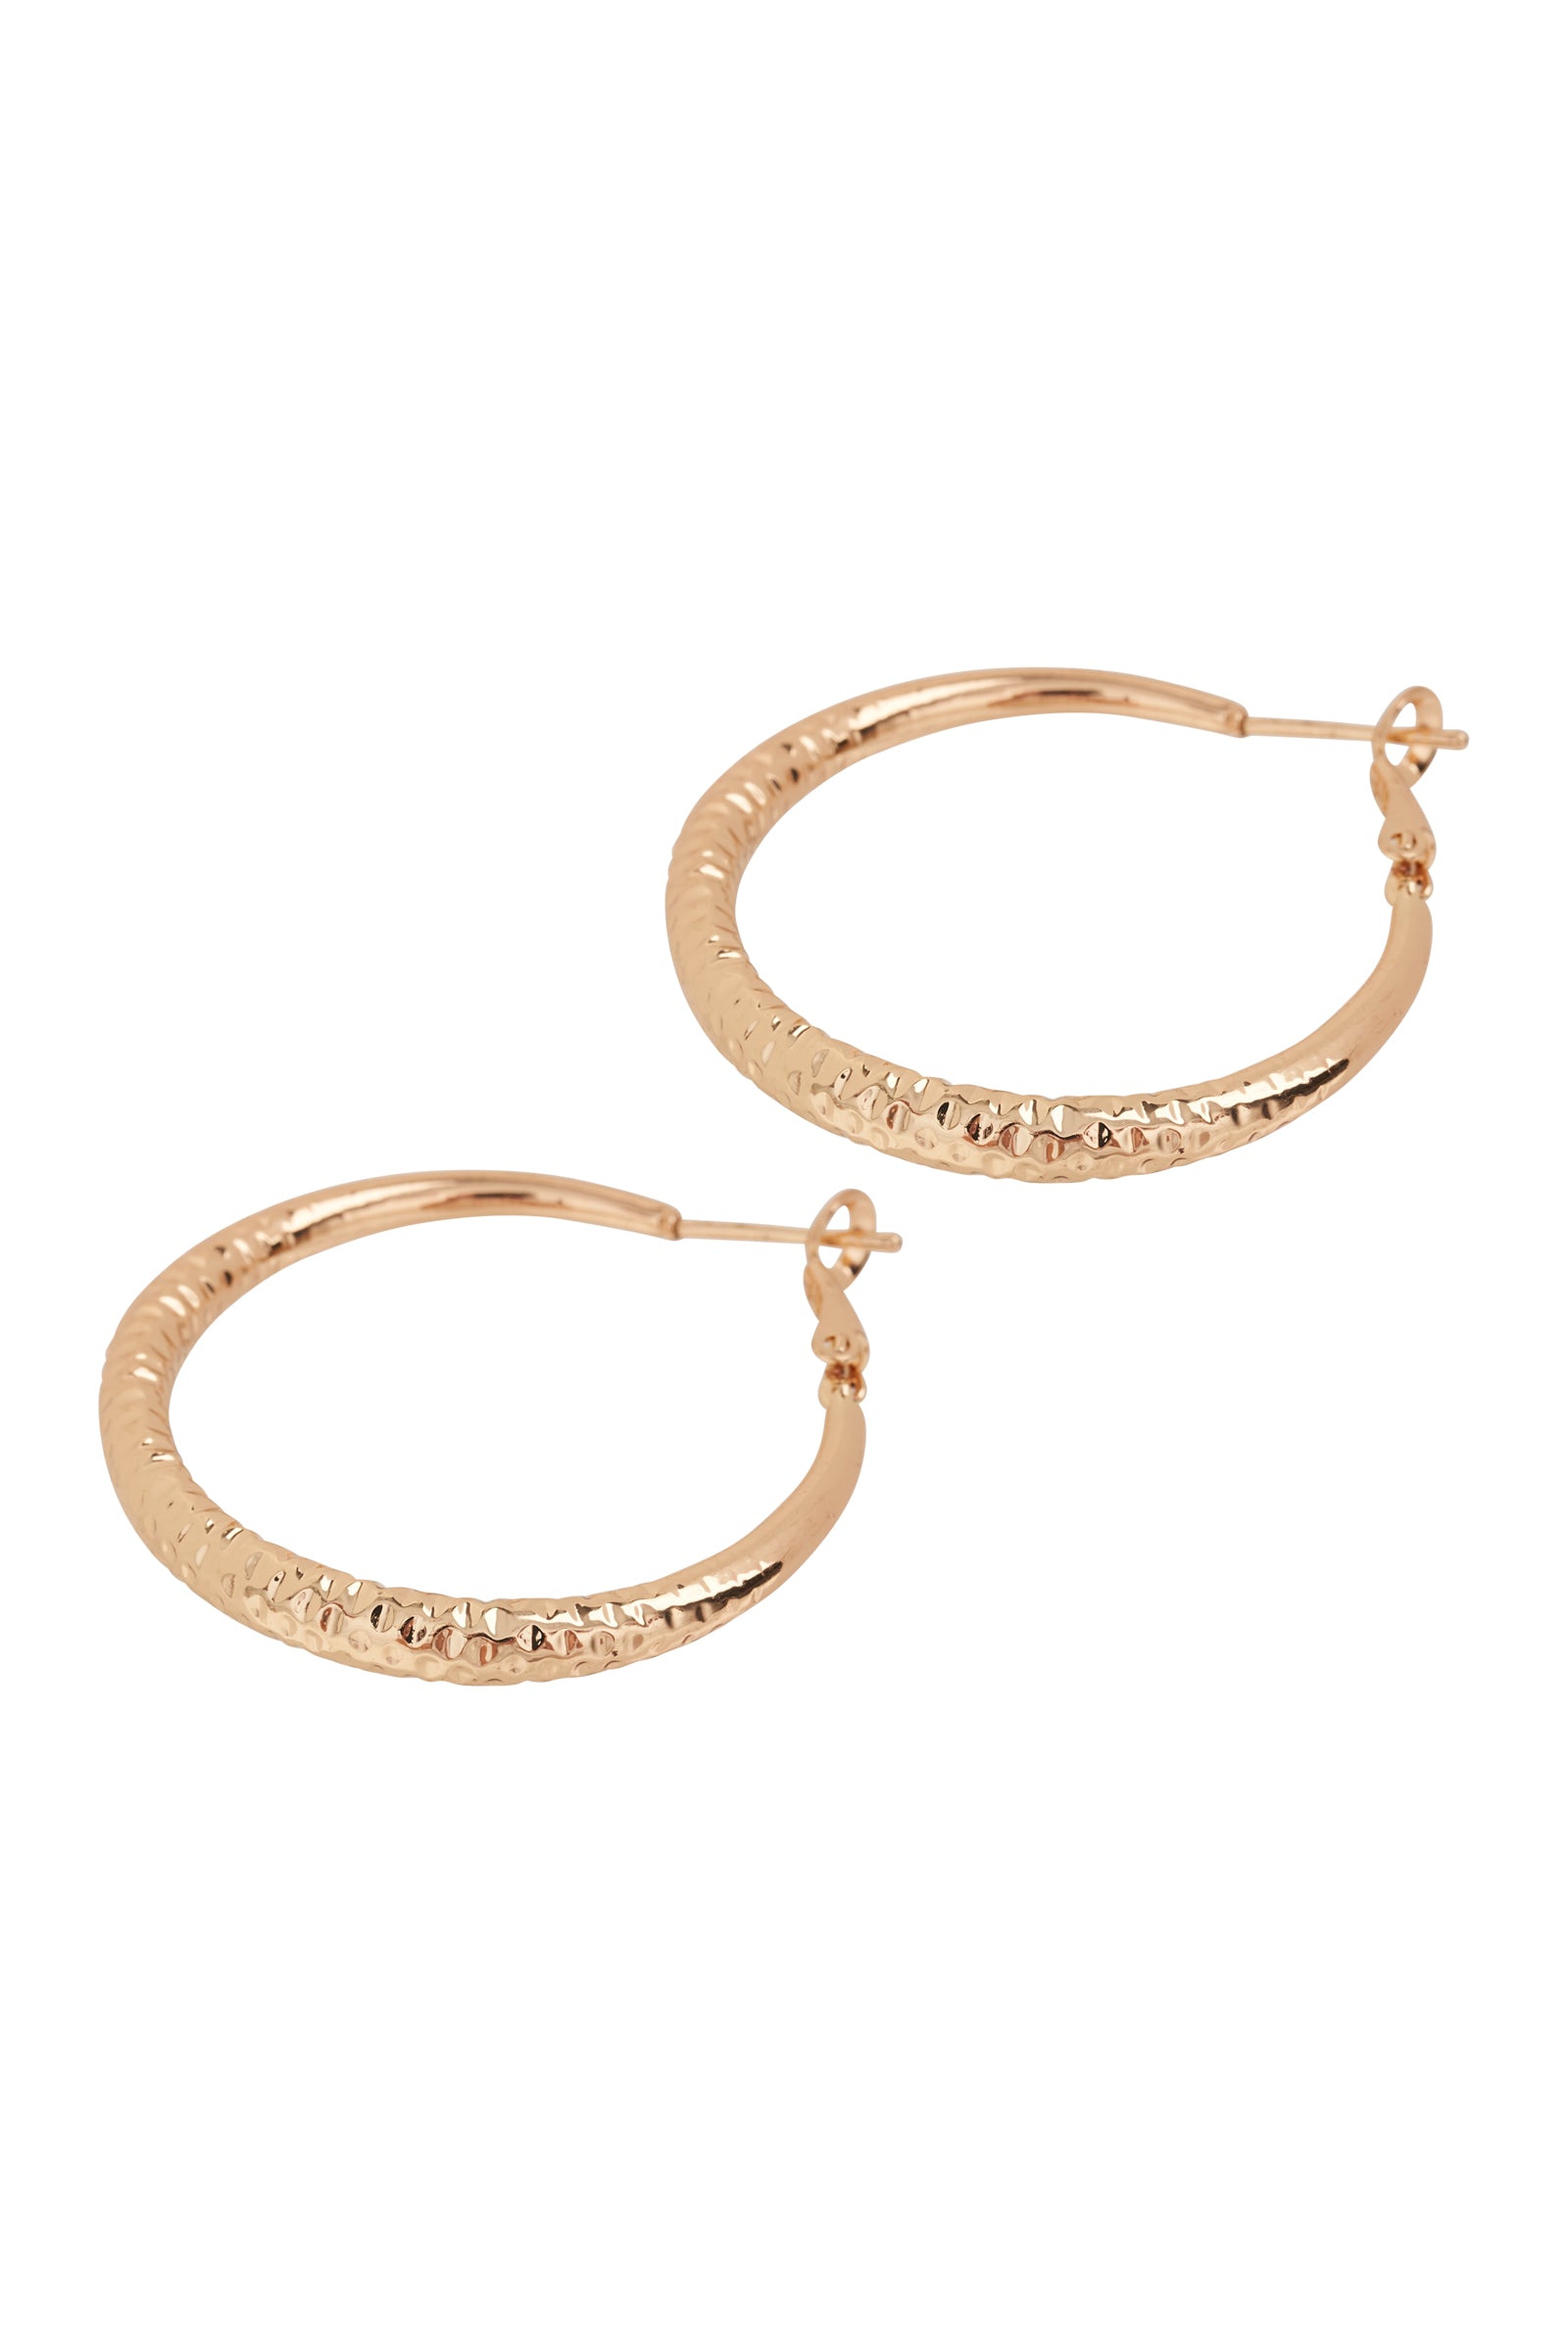 Norse Textured Hoop - Gold - eb&ive Earring